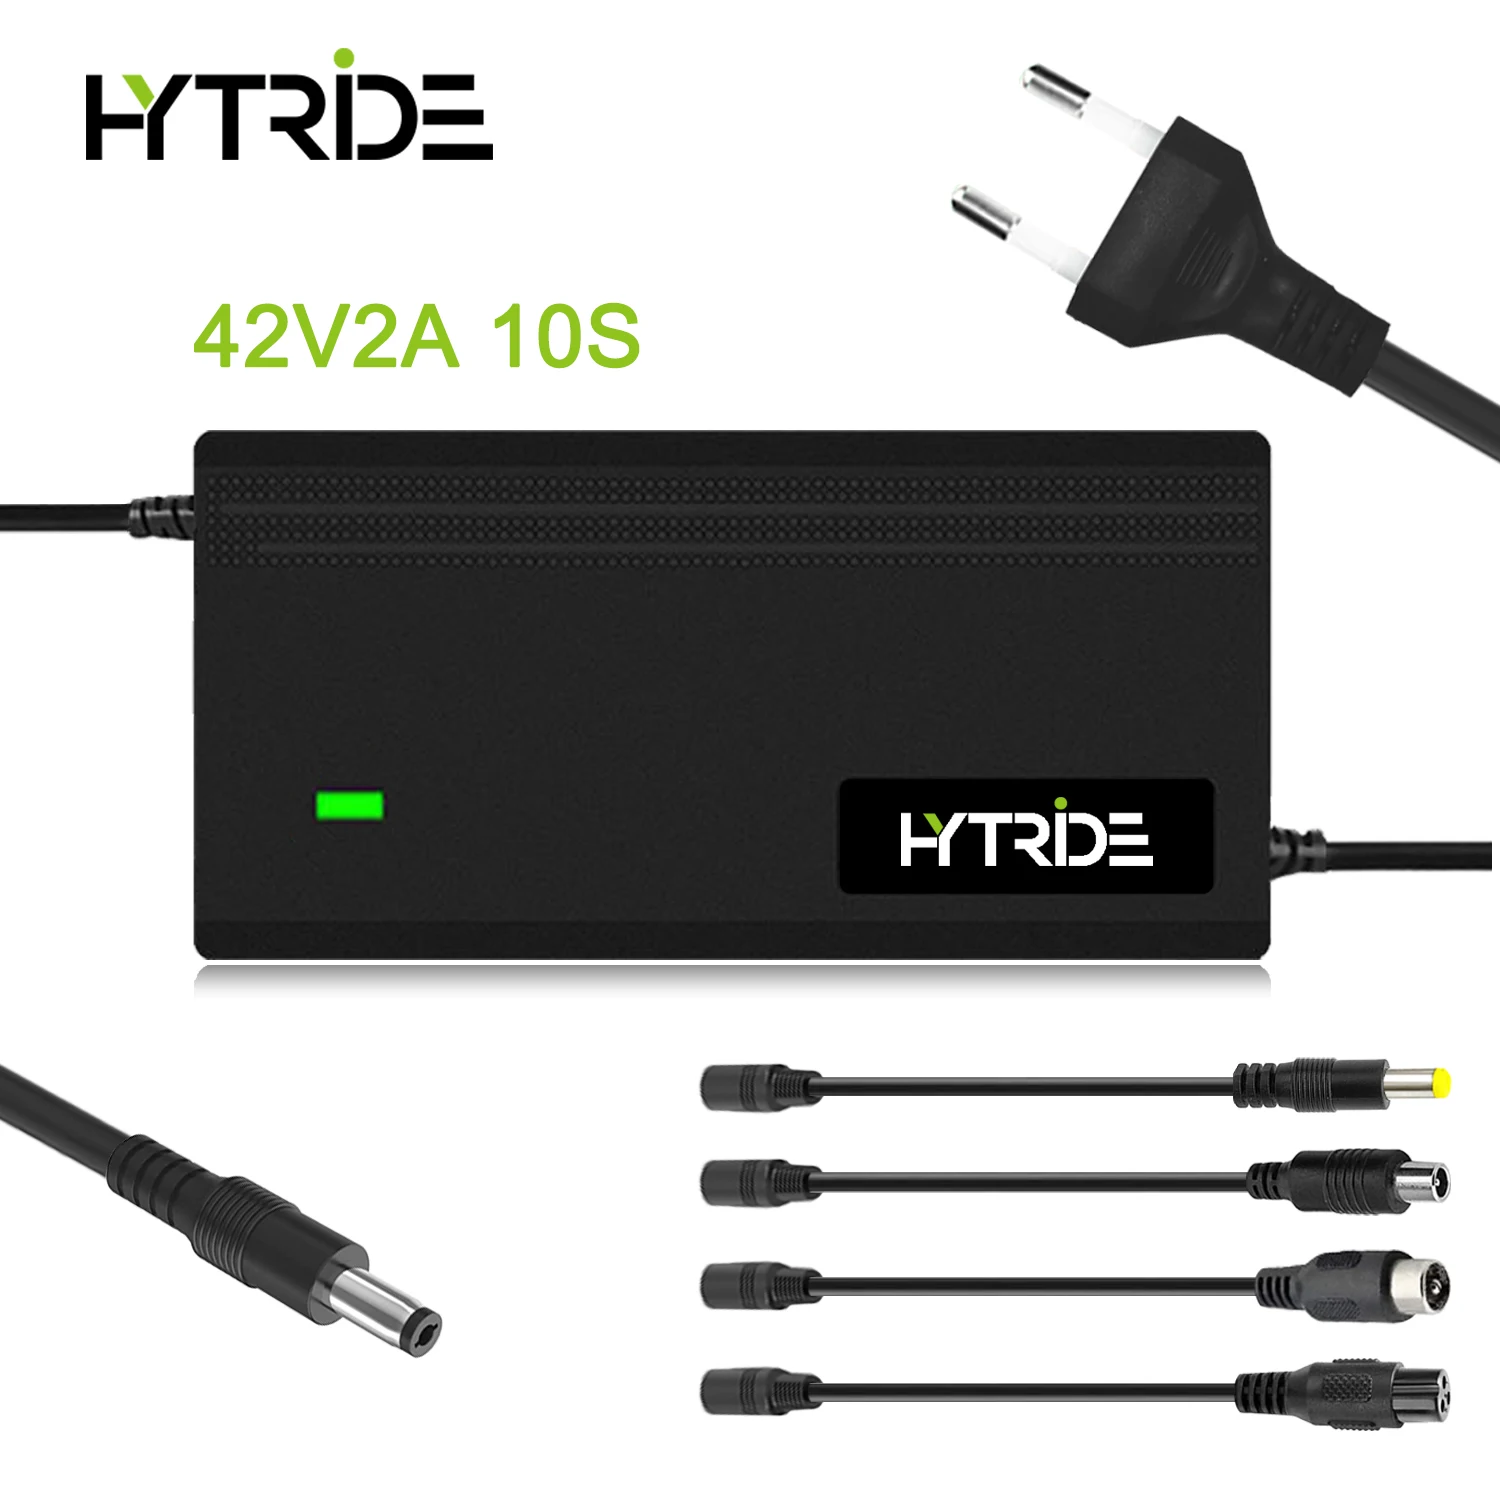 HYTRIDE 36V 2A Battery Charger 42V 2A 10S Lithium ion Charger Scooter Charger for Xiaomi M365 Ninebot Segway Scooter, 110-240V